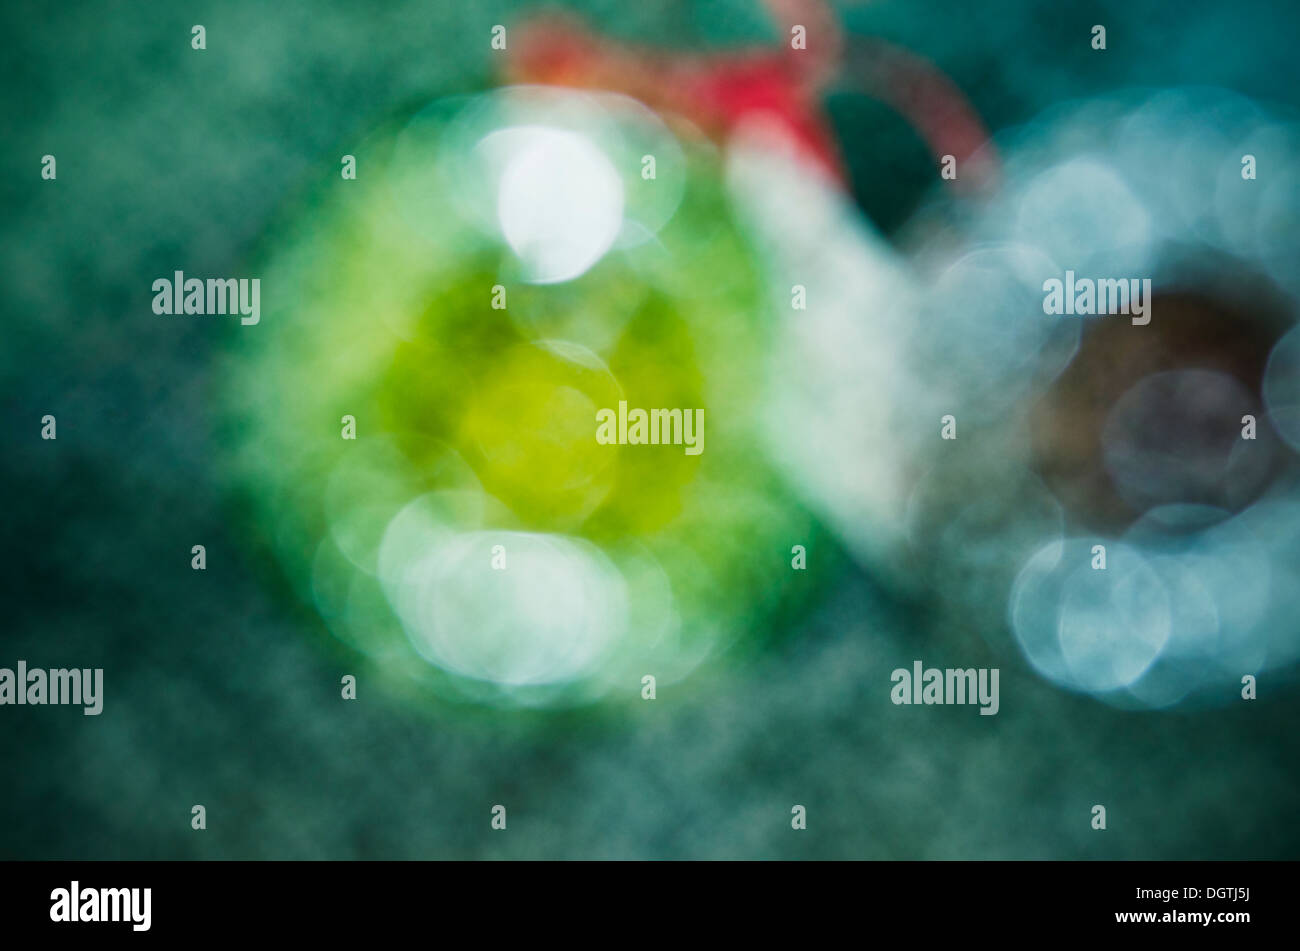 Blurred bright background light of different colors Stock Photo